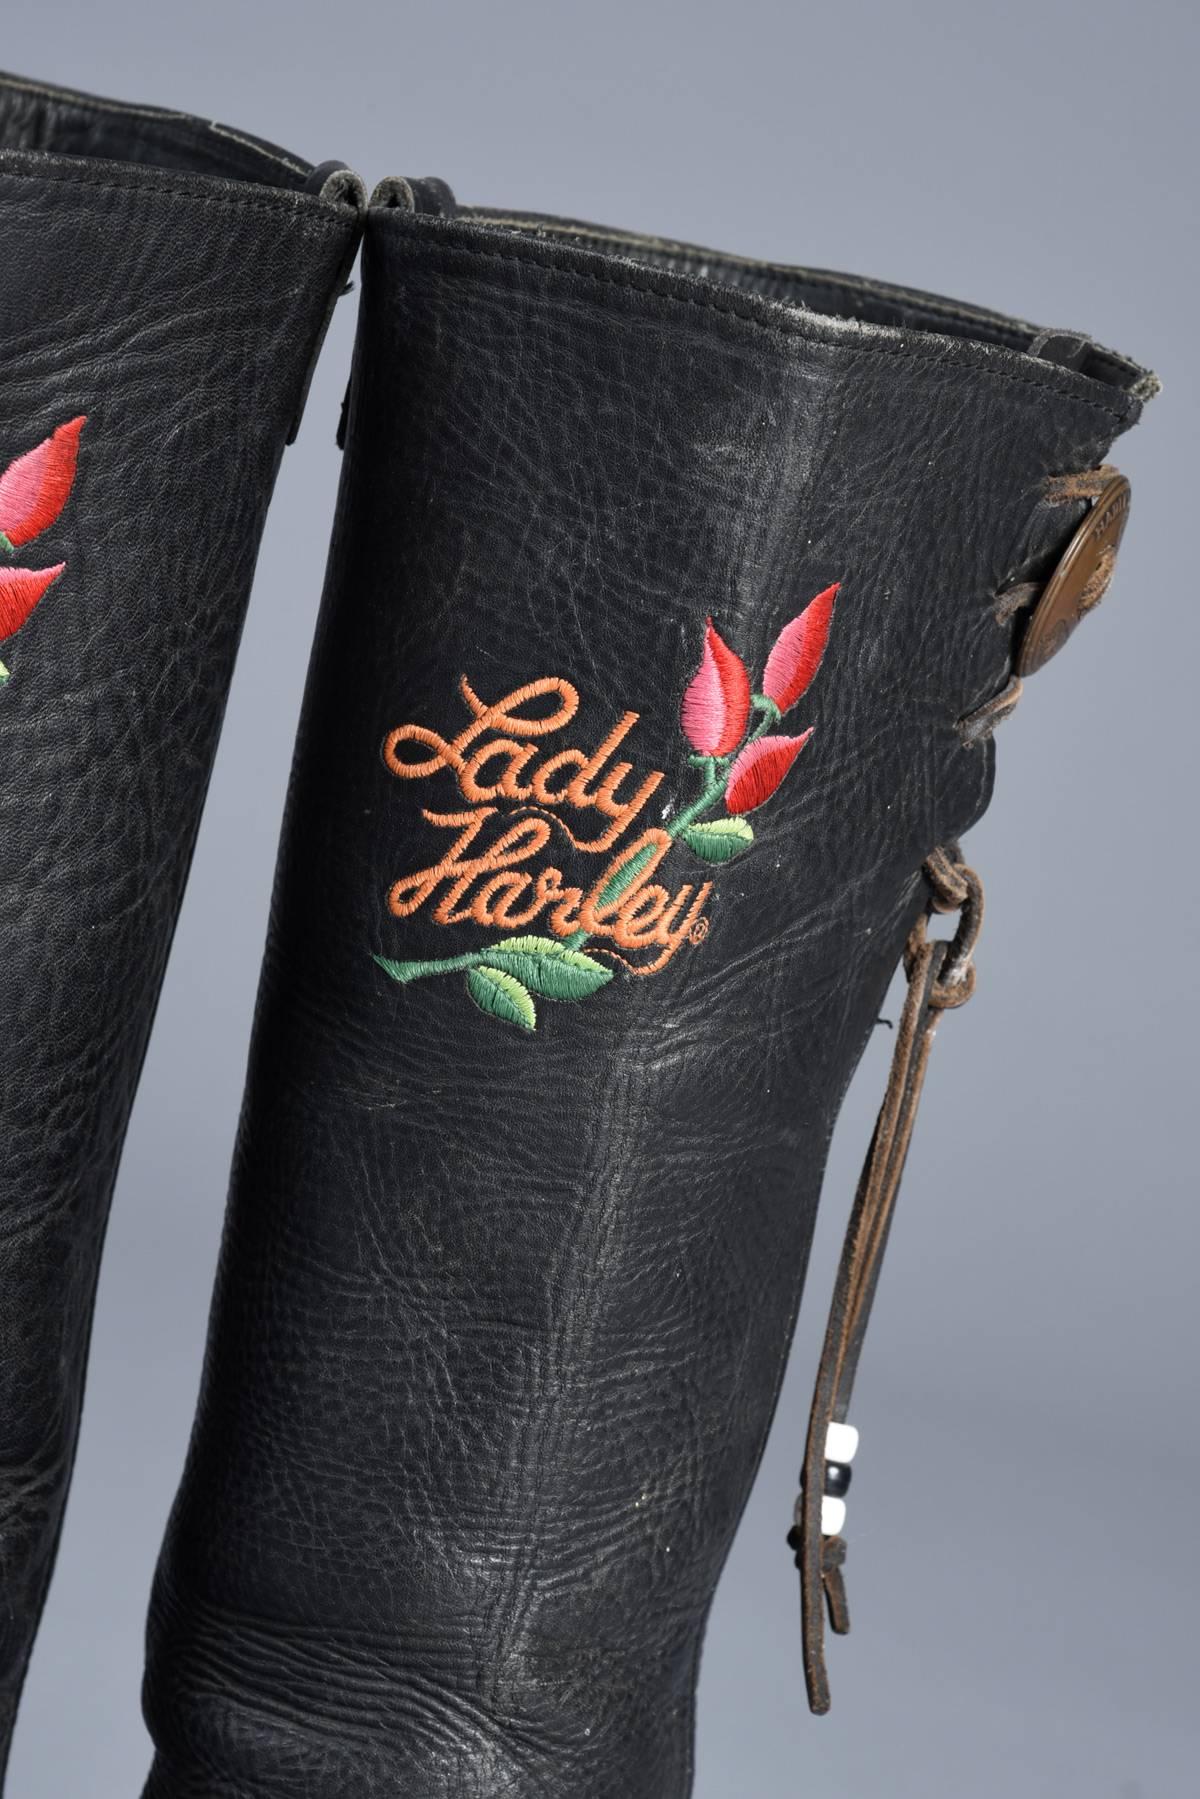 Lady Harley Motorcycle Boots with Embroidered Roses  In Excellent Condition For Sale In Yucca Valley, CA